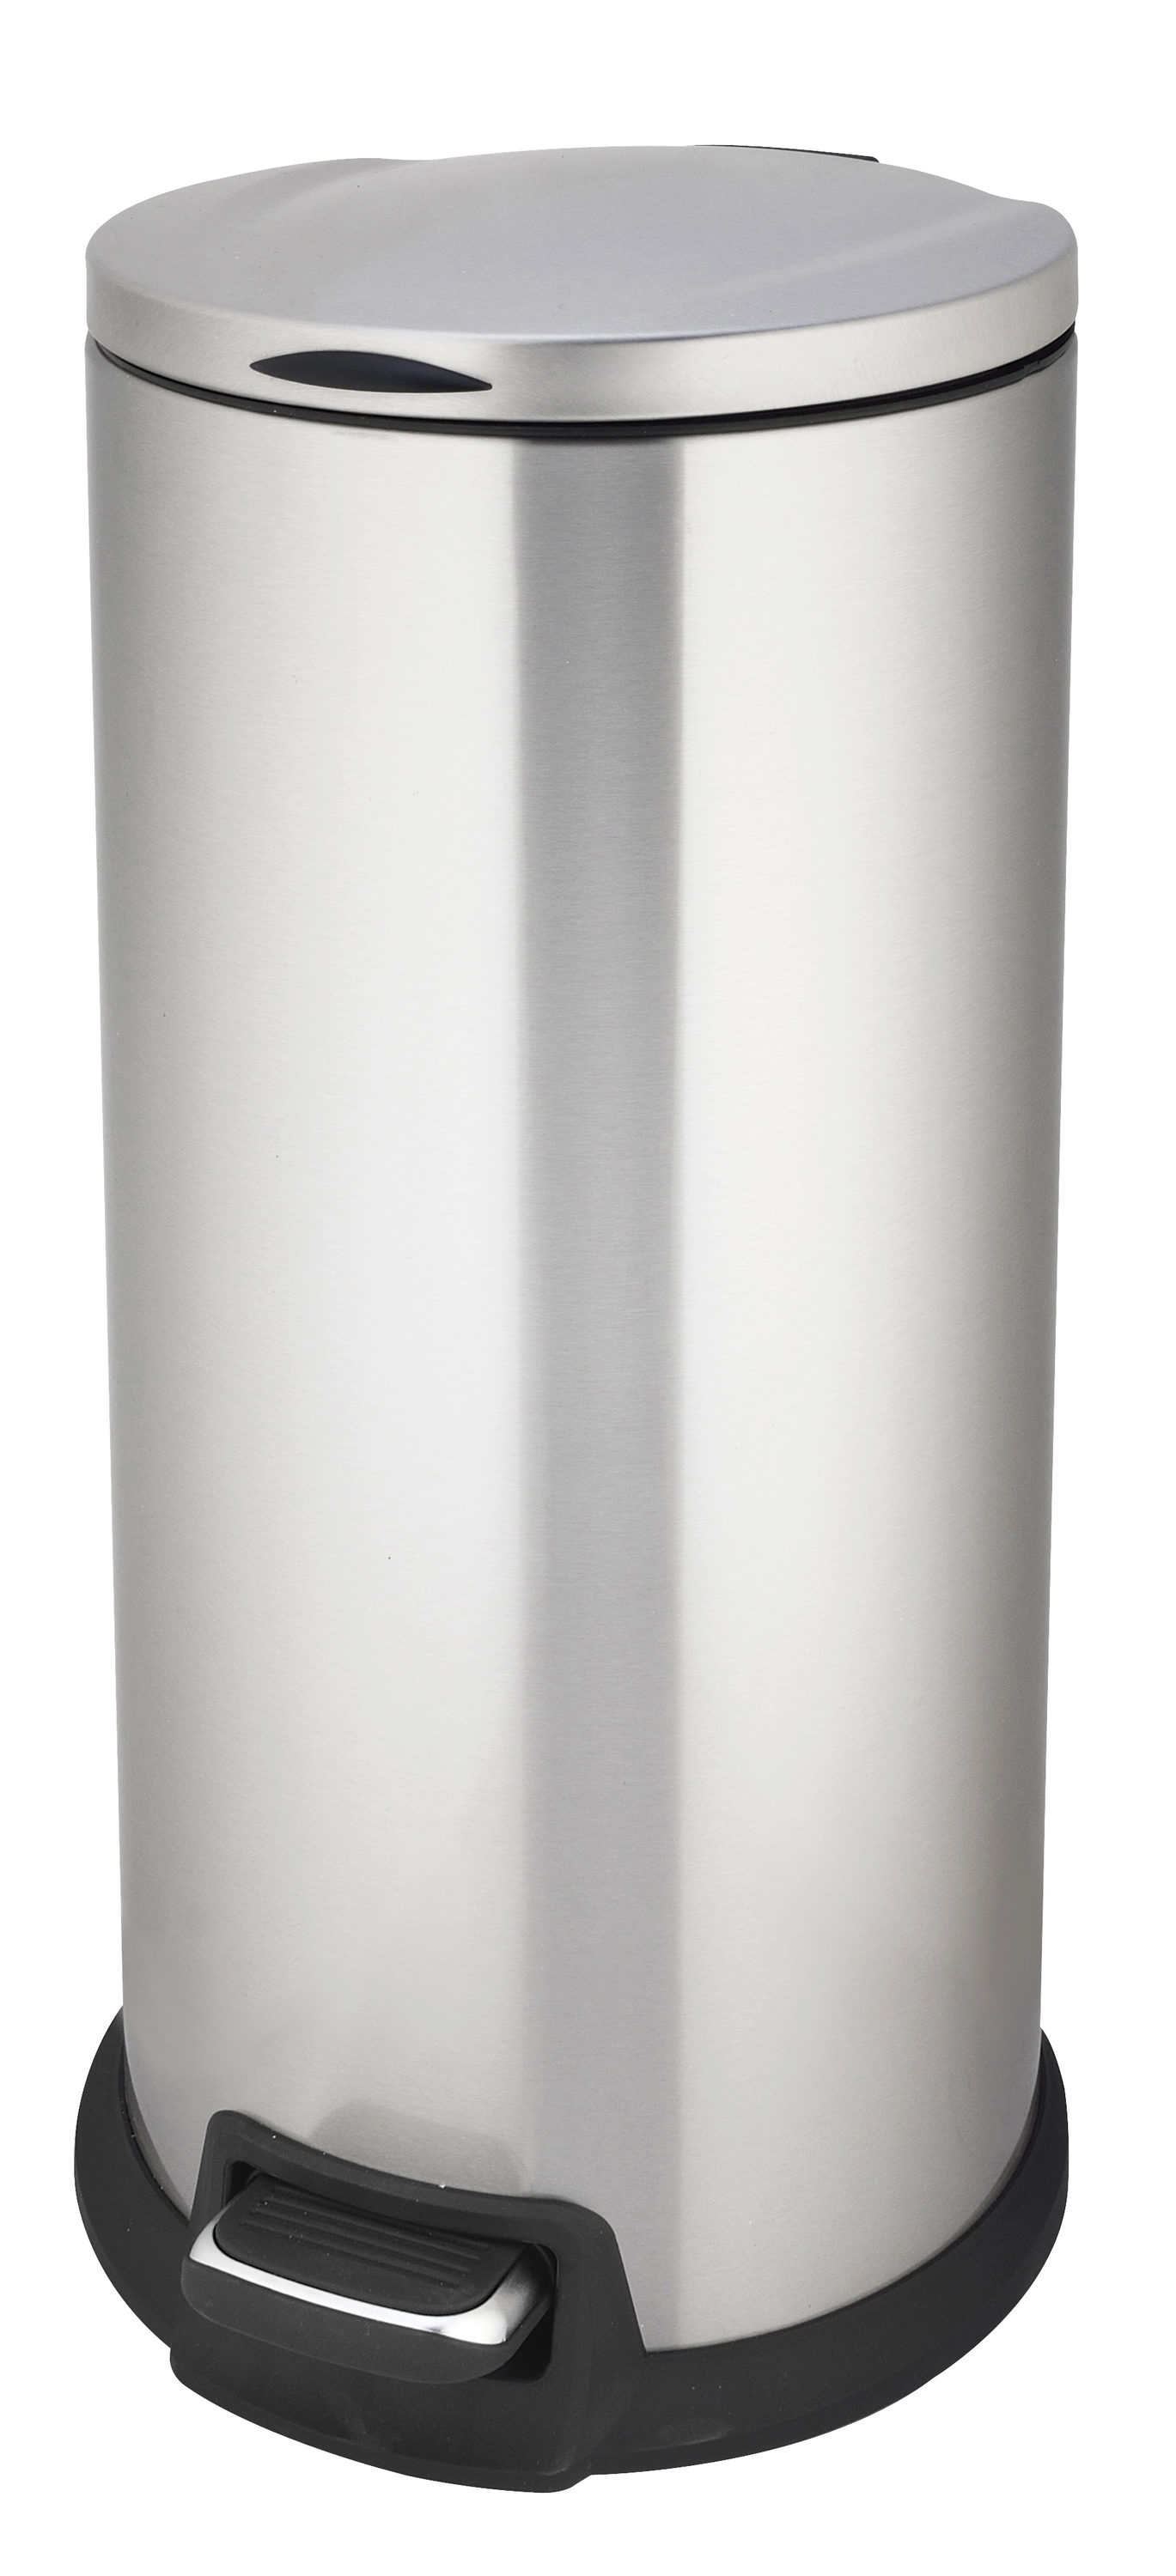 MOXIE 30-Liter Chrome Steel Kitchen Trash Can with Lid Indoor at Lowes.com